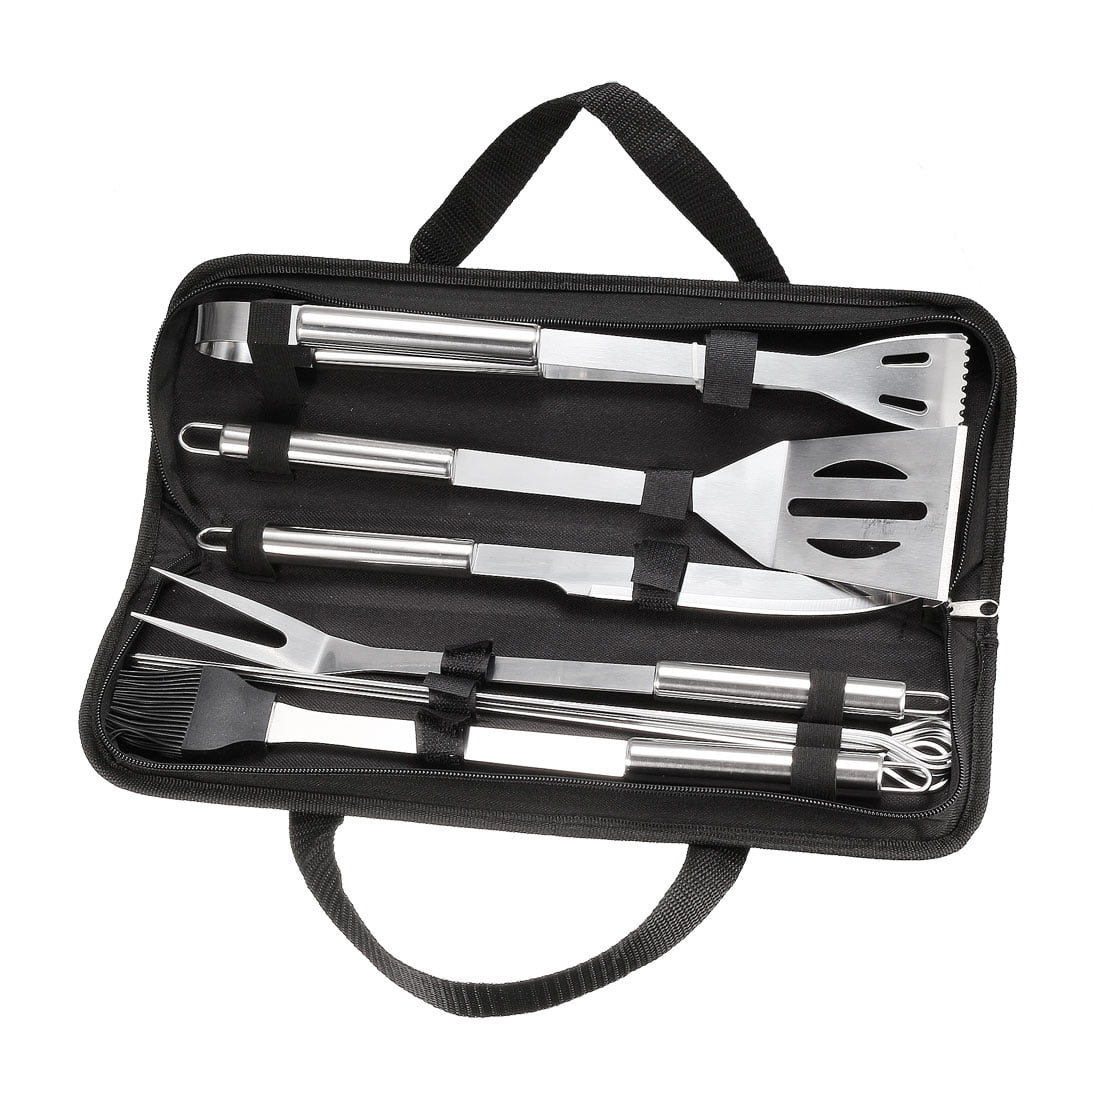 Uxcell 9 in 1 BBQ Grill Tool Set- Grilling Accessories with Carrying ...